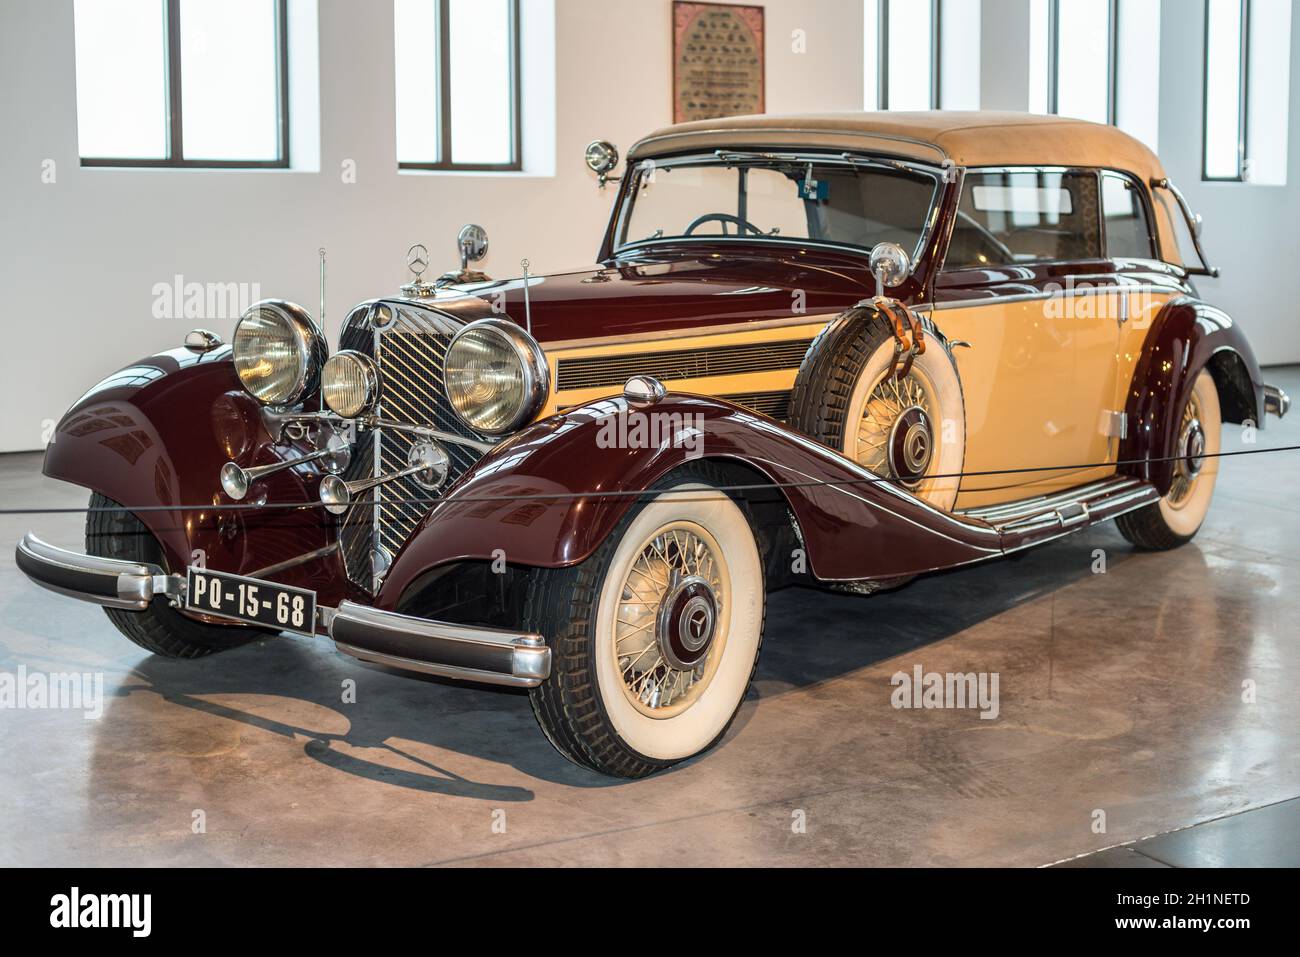 Malaga, Spain - December 7, 2016: Vintage Mercedes-Benz 540K (model 1937) Germany car displayed at Malaga Automobile and Fashion Museum in Spain. Stock Photo